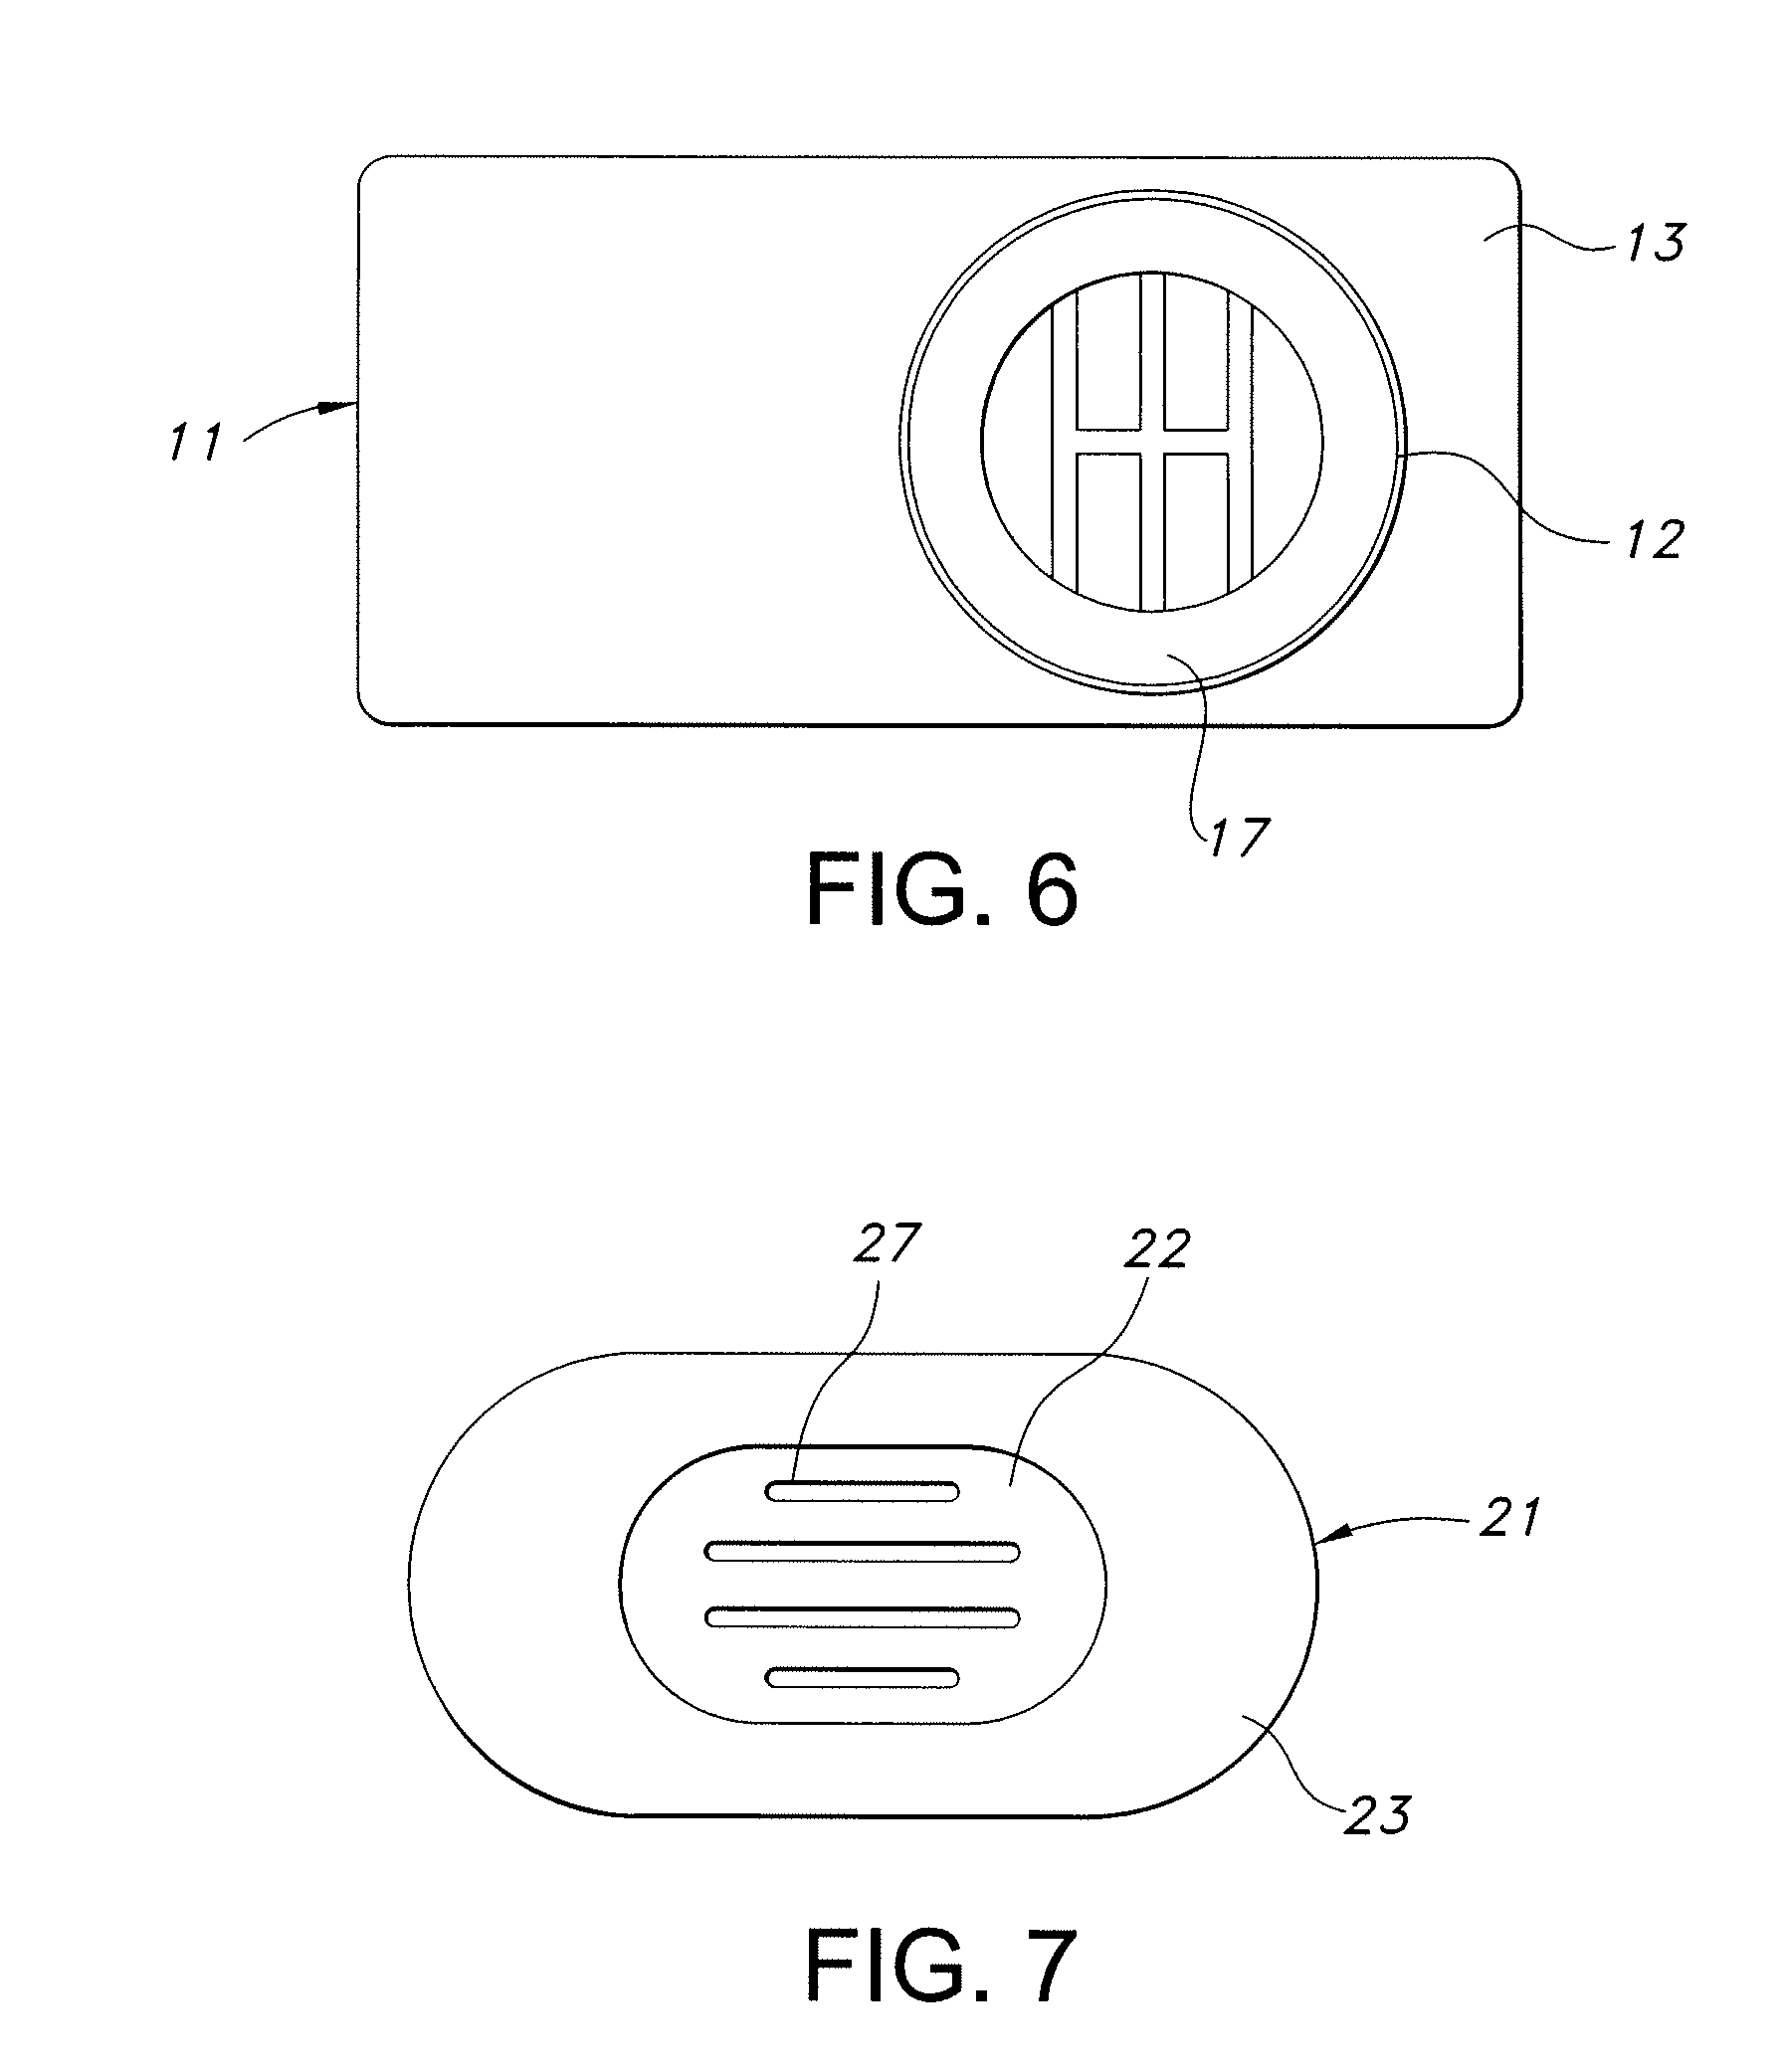 Method for treating ophthalmic lenses